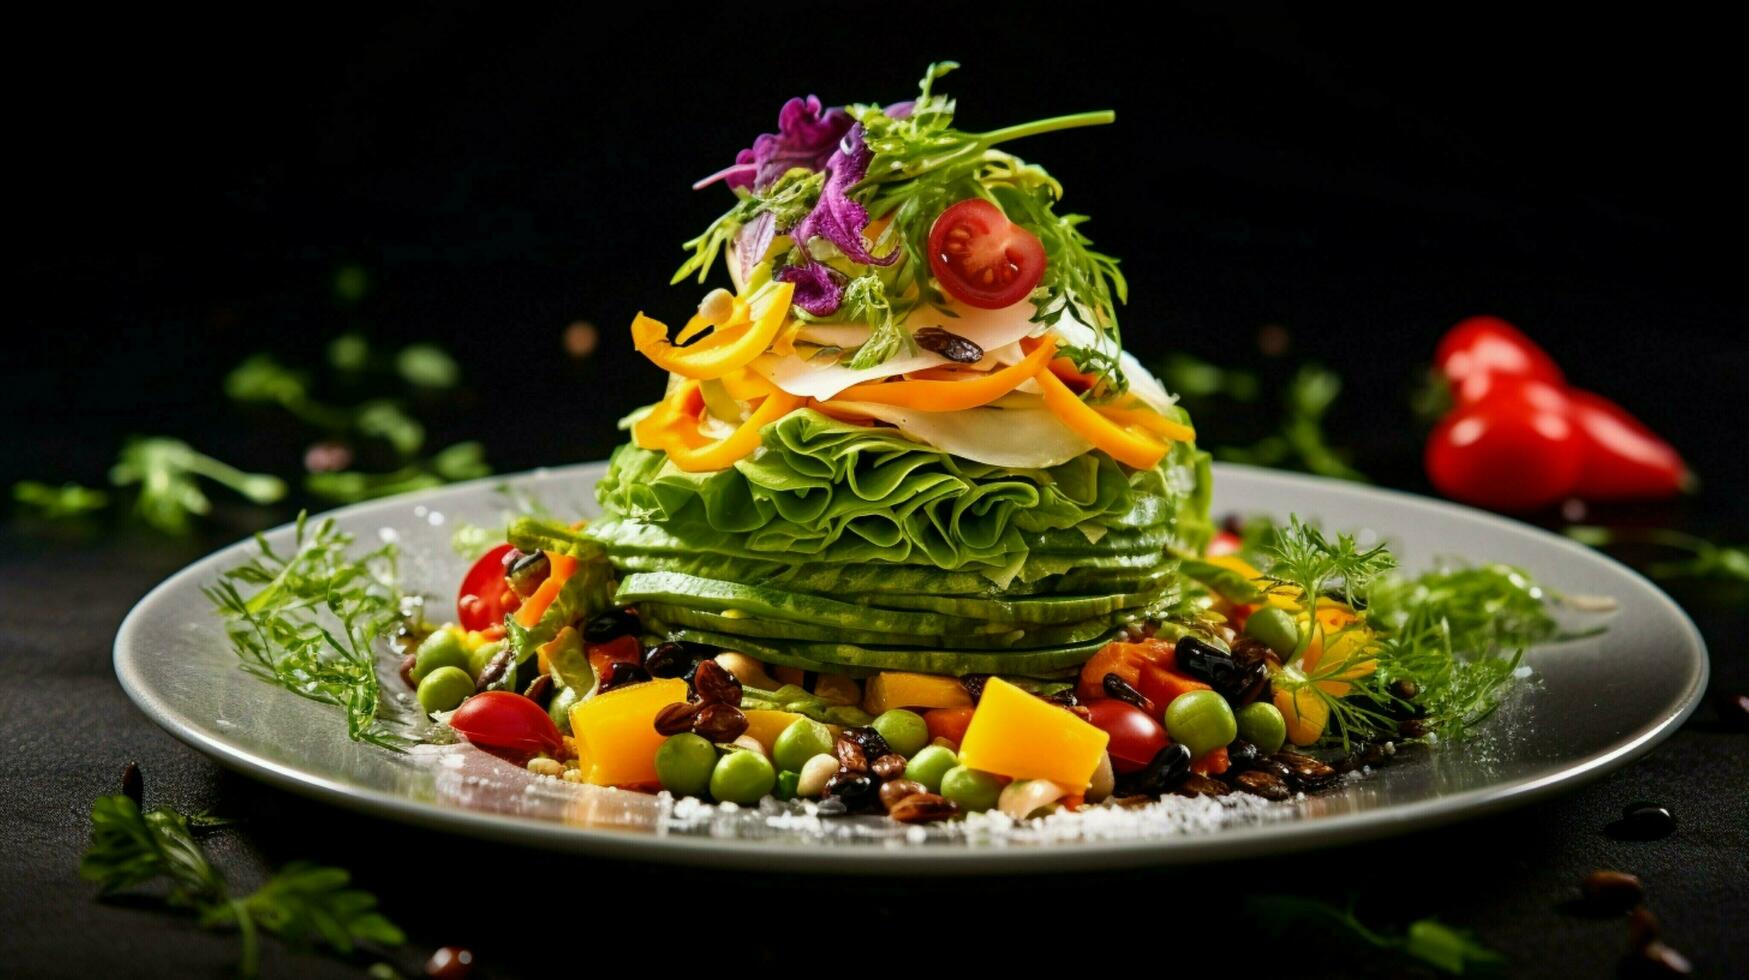 freshness and healthy eating a gourmet vegetarian salad photo